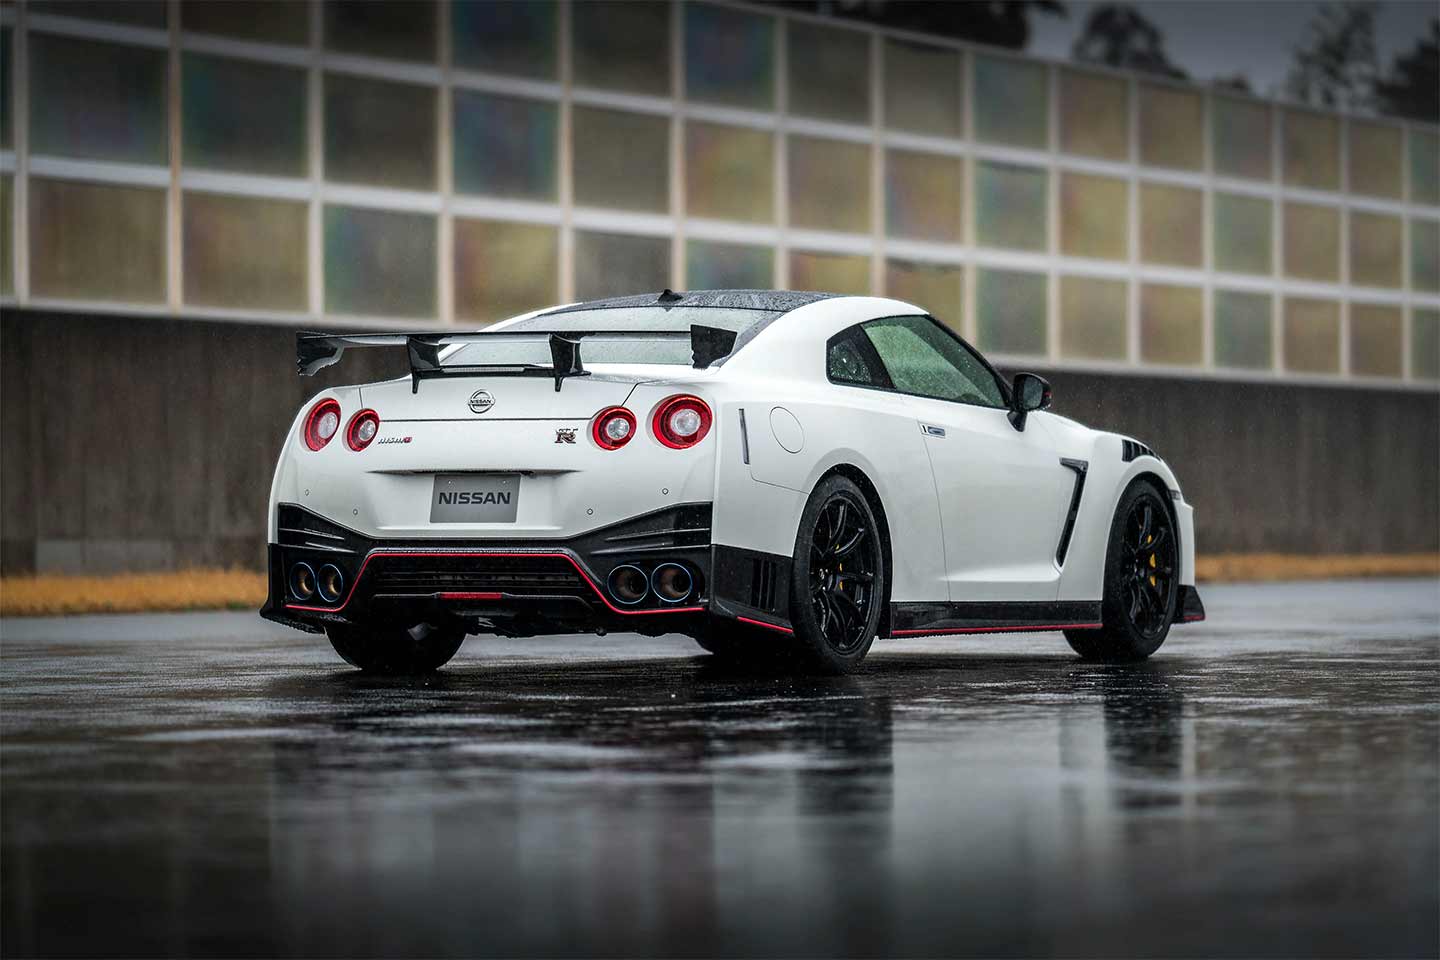 Nismo GT-R Rear Three Quarter View on Wet Track